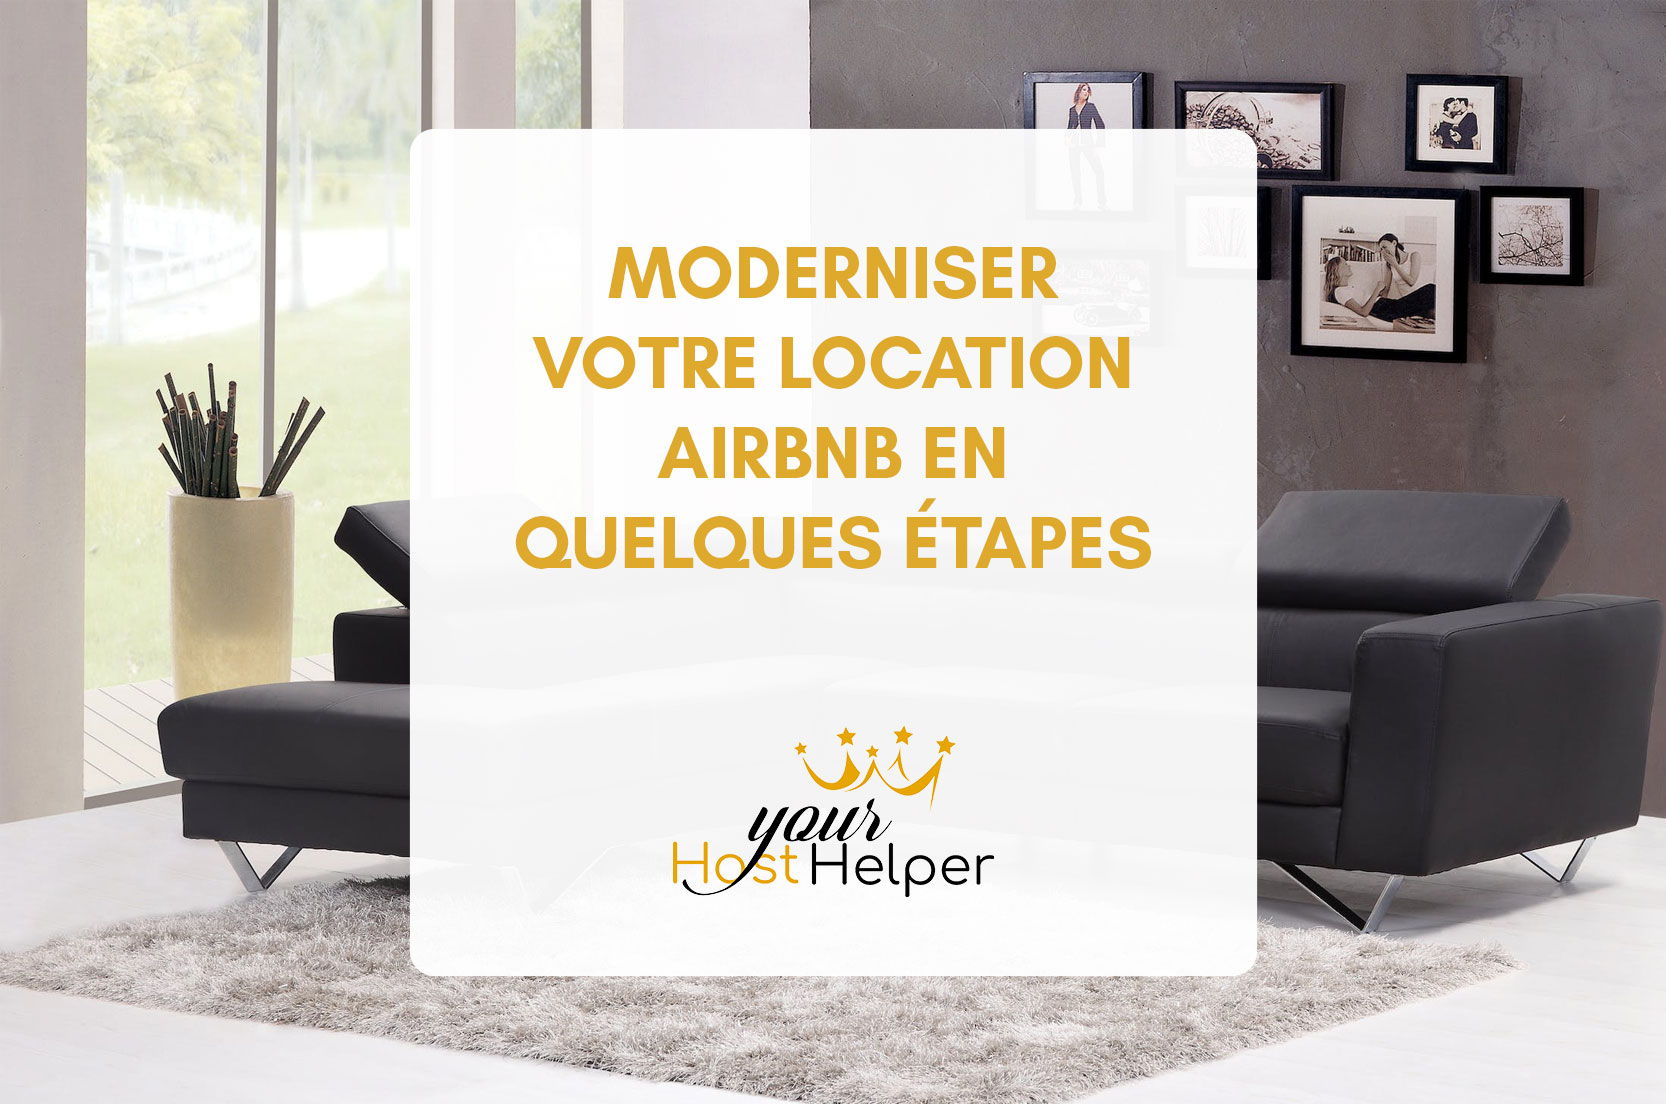 You are currently viewing Moderniser votre location Airbnb en quelques étapes